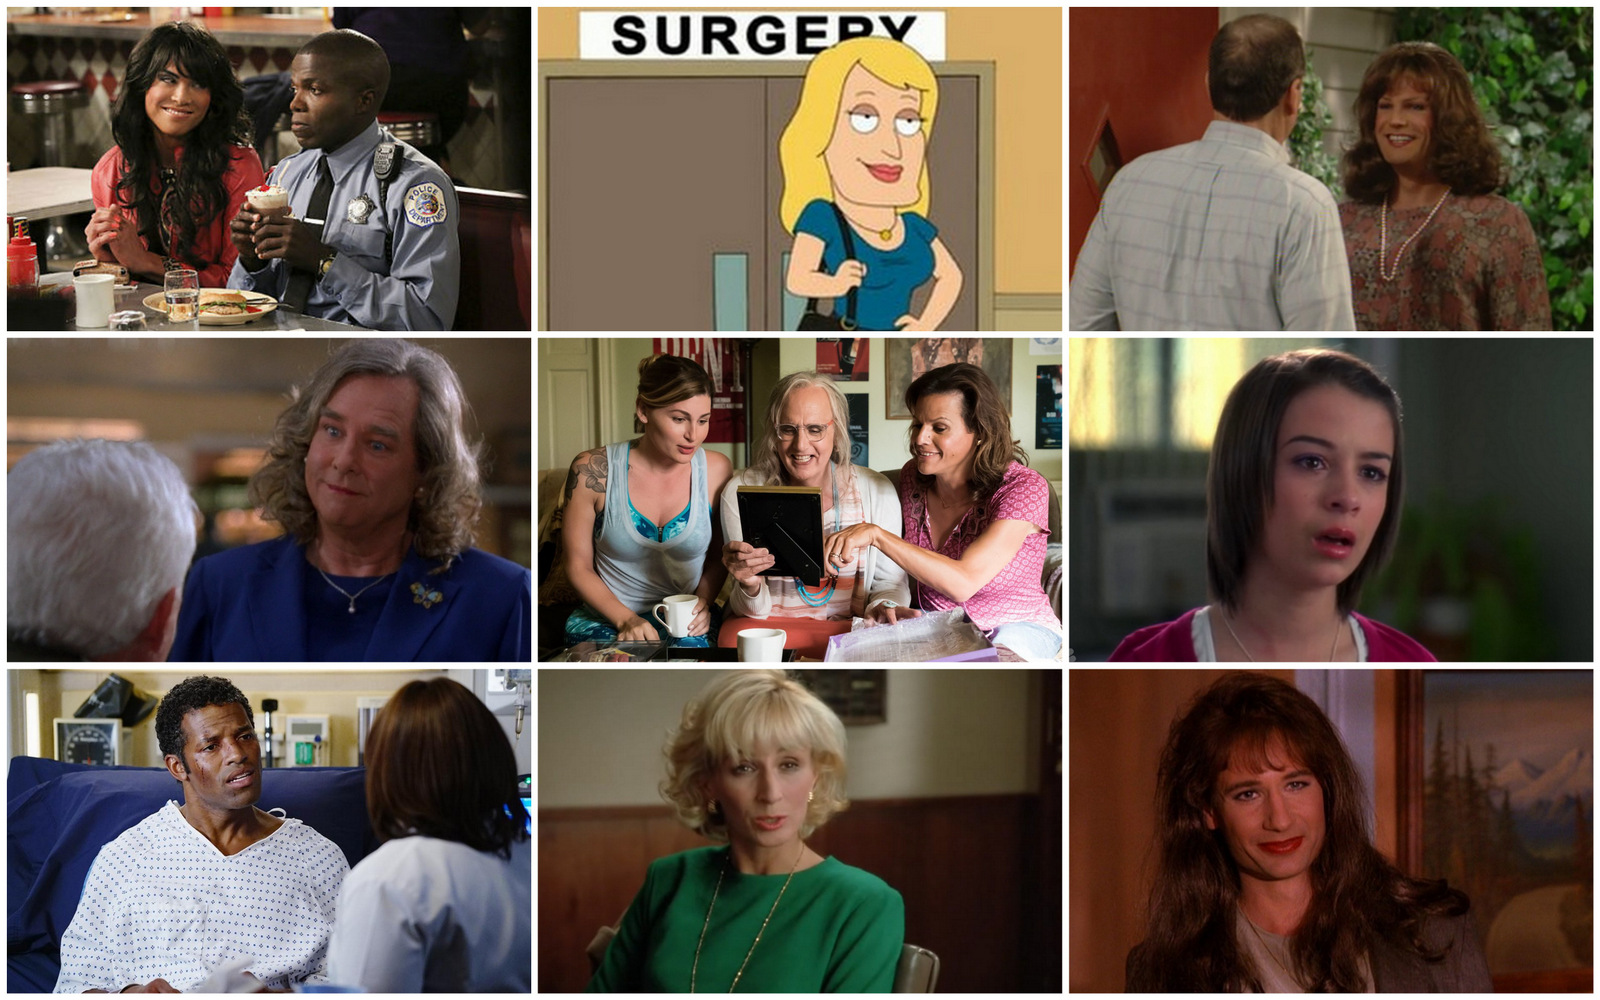 105 Trans Women On American TV: A History and Analysis | Autostraddle